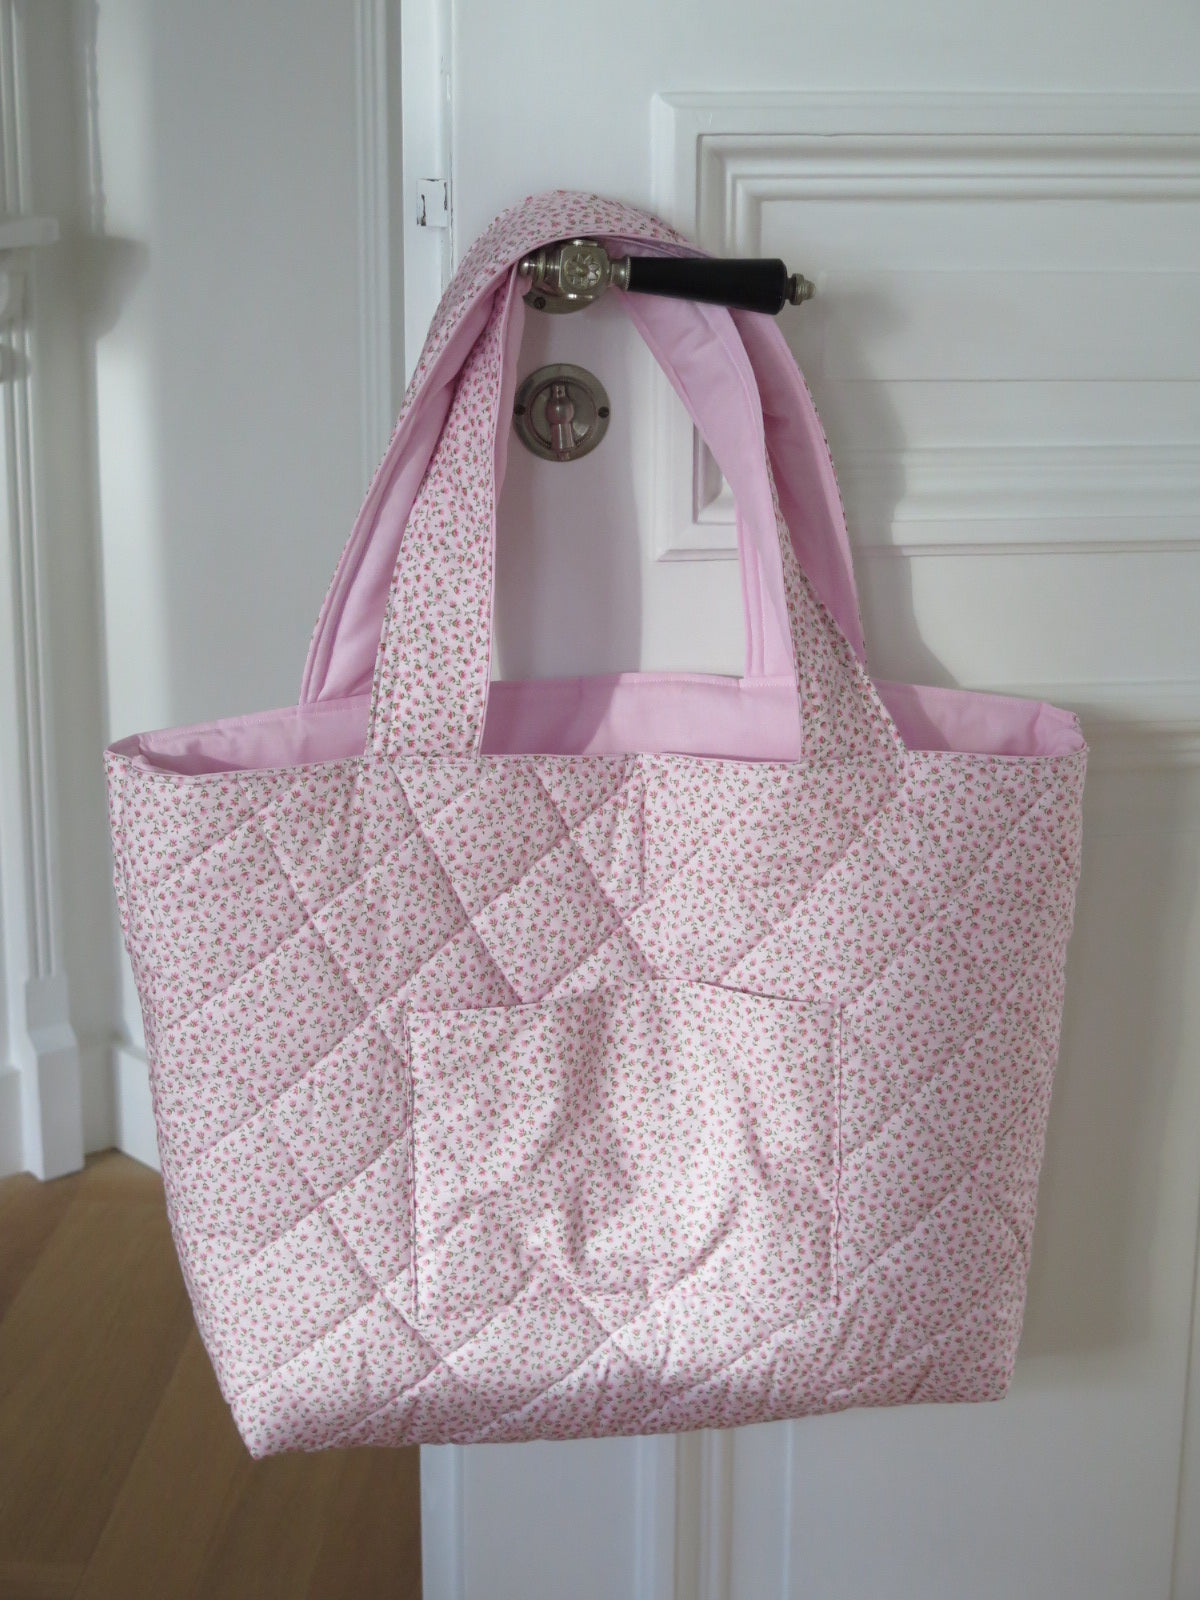 chanel pink shopping bags